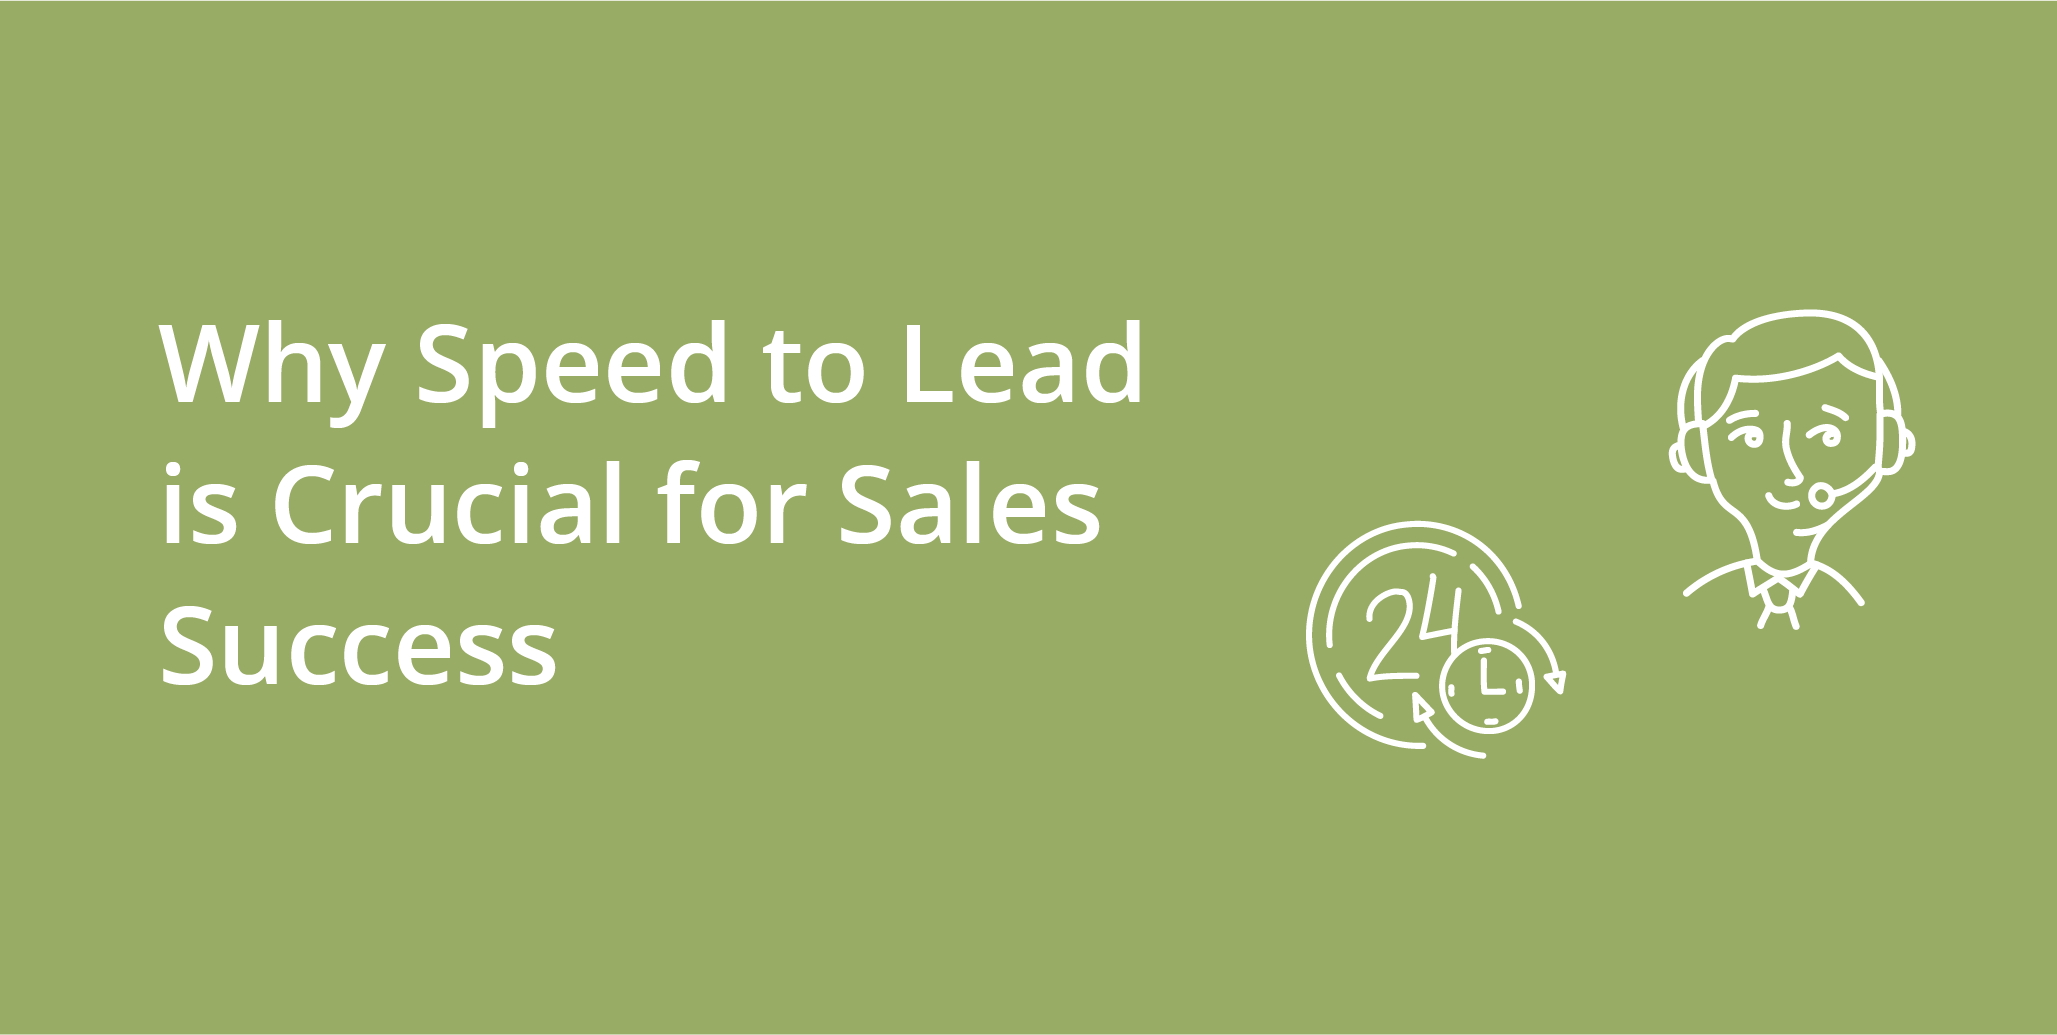 Why Speed to Lead is Crucial for Sales Success | Telephones for business